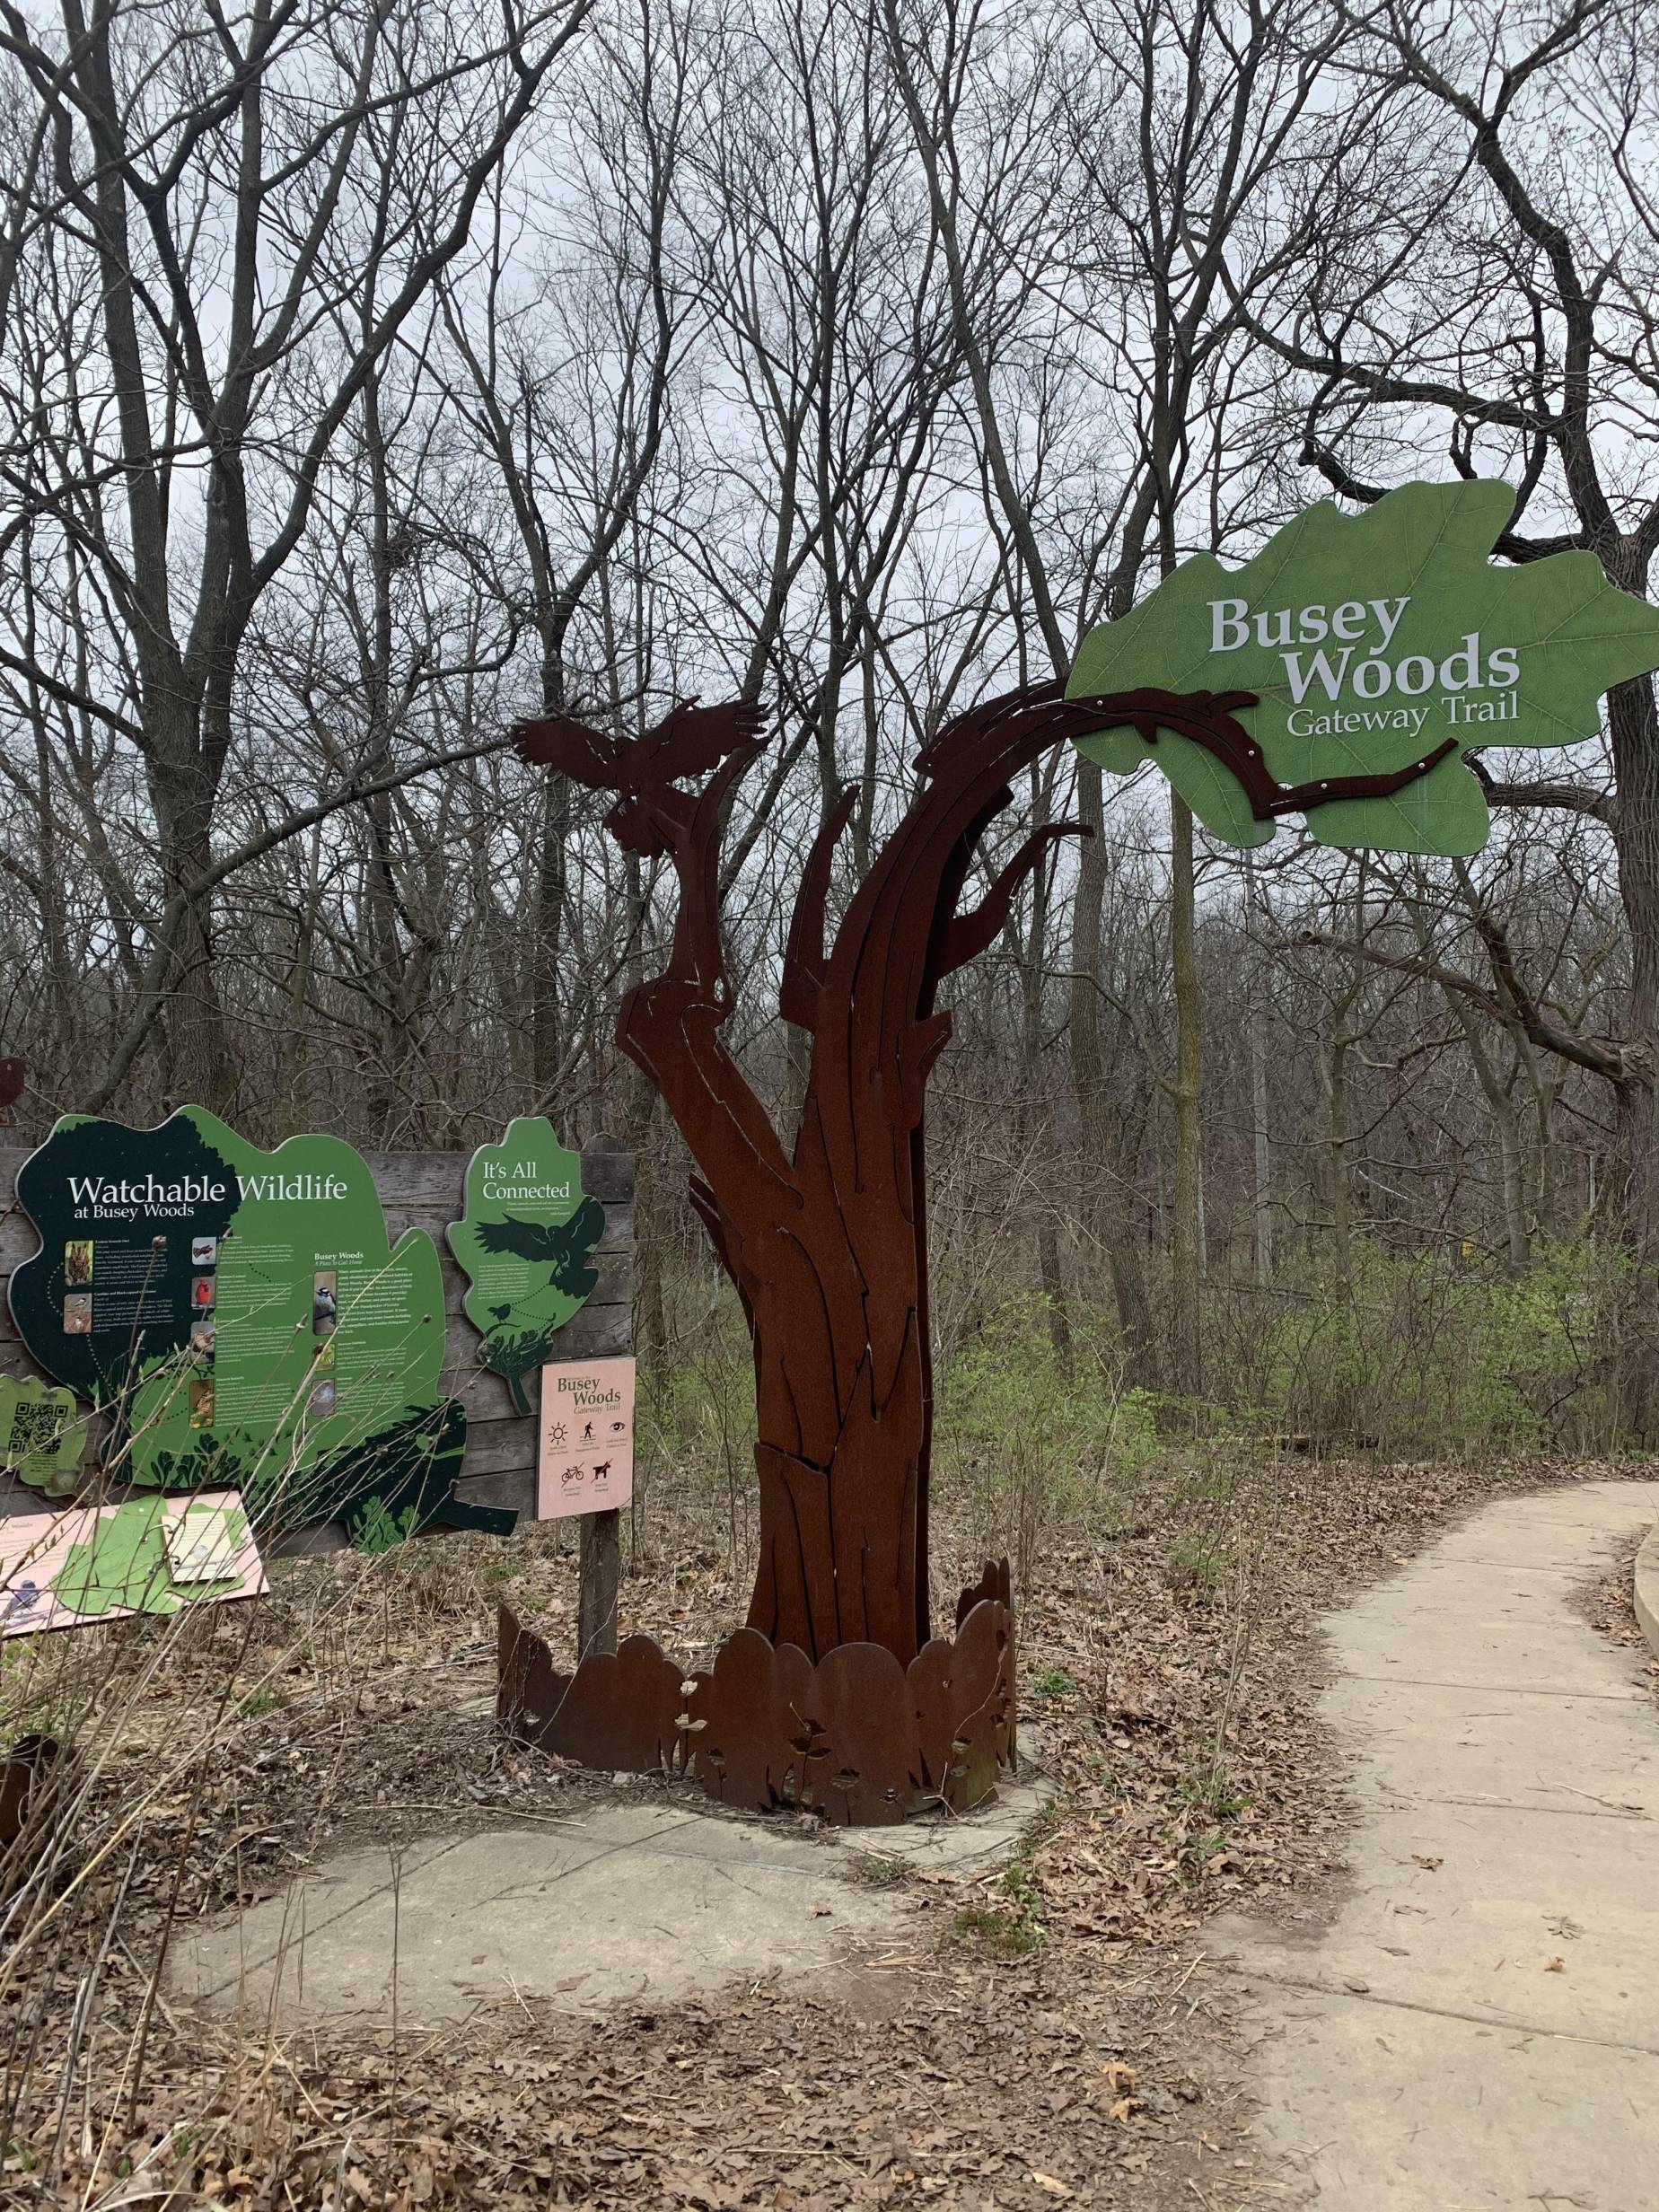 The entrance to Busey Woods. There is a sign that is a tree with a brown trunk and a large green leaf that says Busey Woods Gateway Trail in white letters. There is signage that explains its history and the flora and fauna that live there. A sidewalk veers to the right of the sign and there are trees with bare branches in the background. Photo by Seth Fein